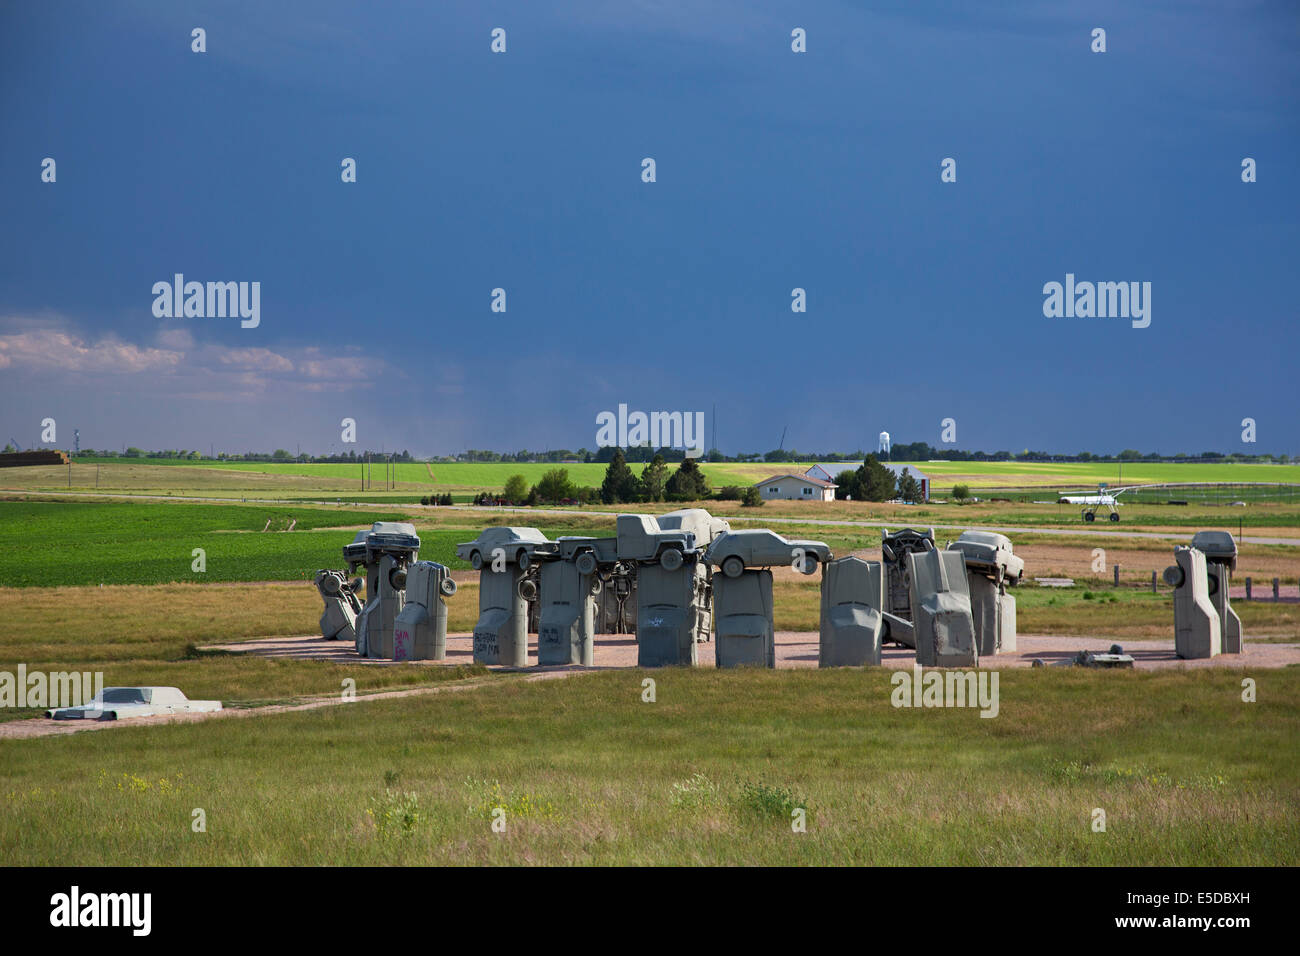 Alliance, Nebraska - Carhenge, a circle of old cars bolted together and half buried in the ground. Stock Photo